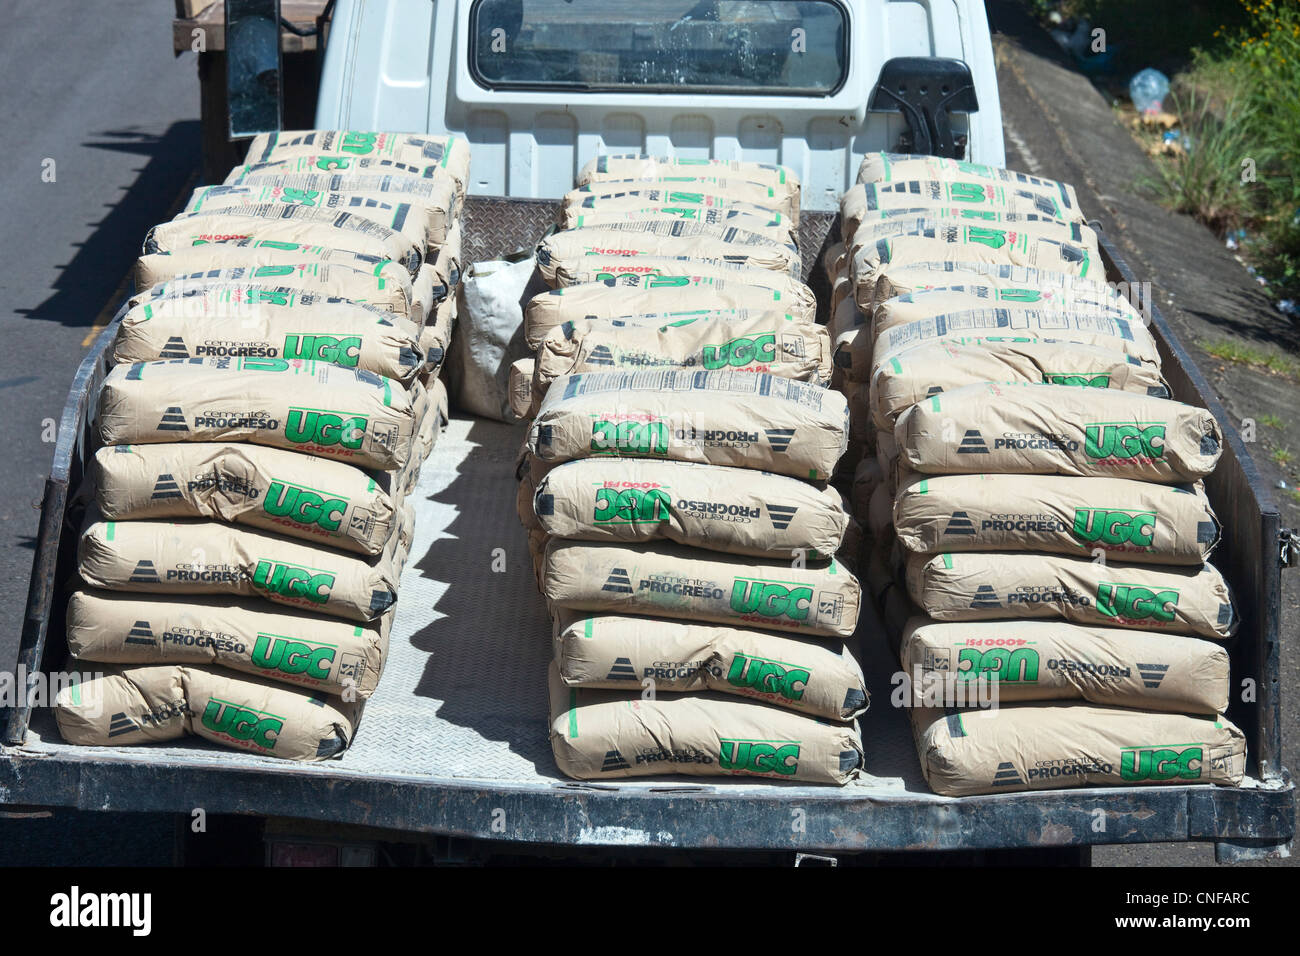 Truck loaded with Cement from Cementos Progreso, El Salvador Stock Photo